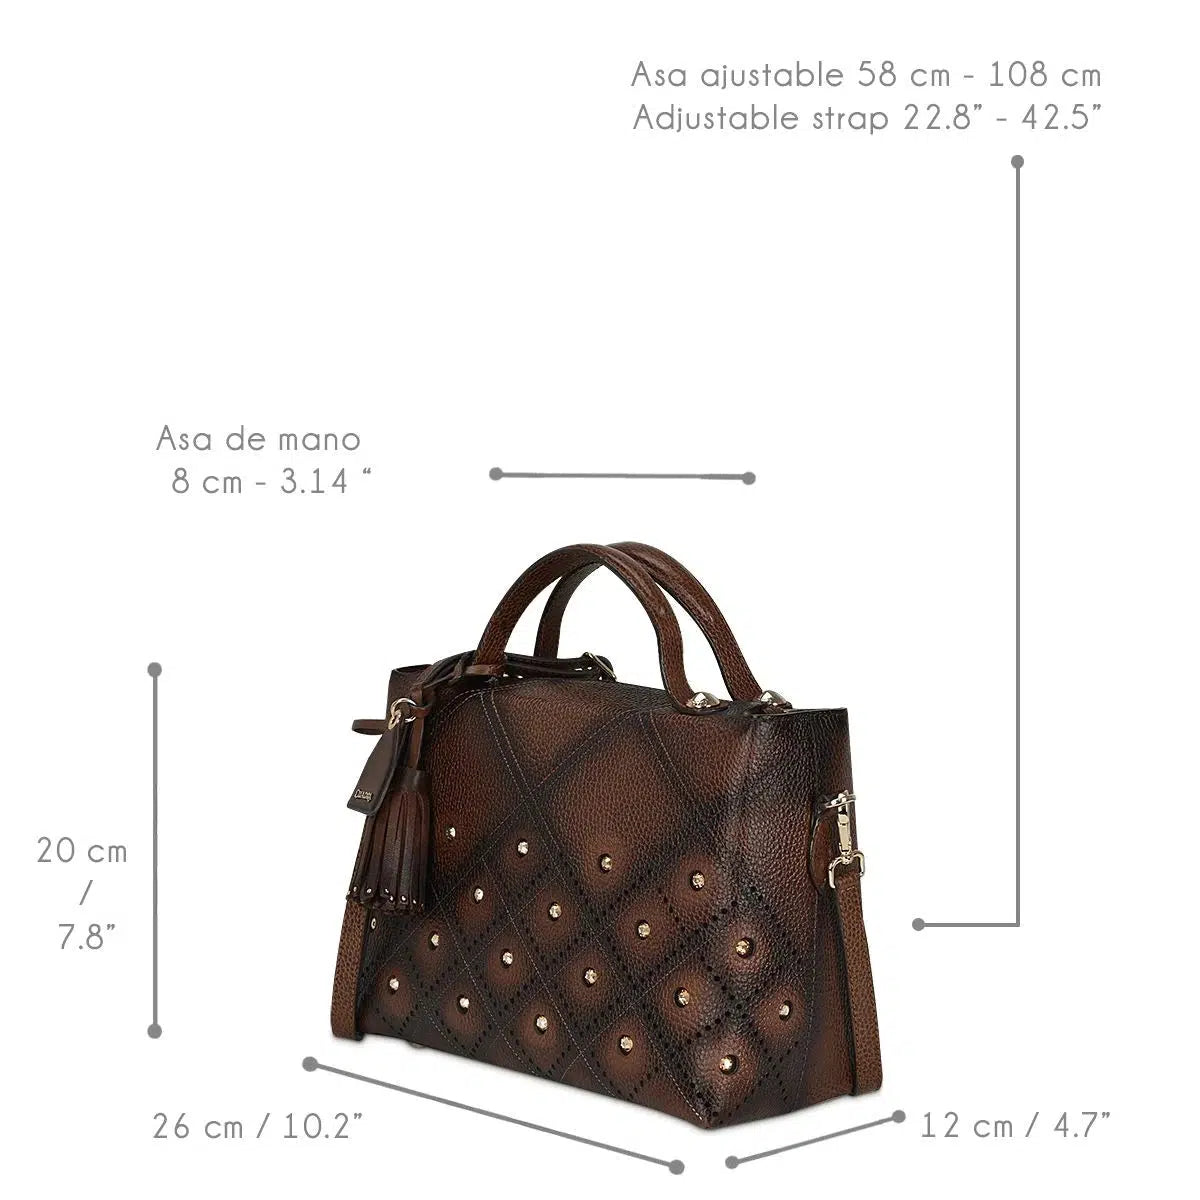 BOD56RS - Cuadra chocolate casual fashion bag in cowhide leather for woman-Kuet.us